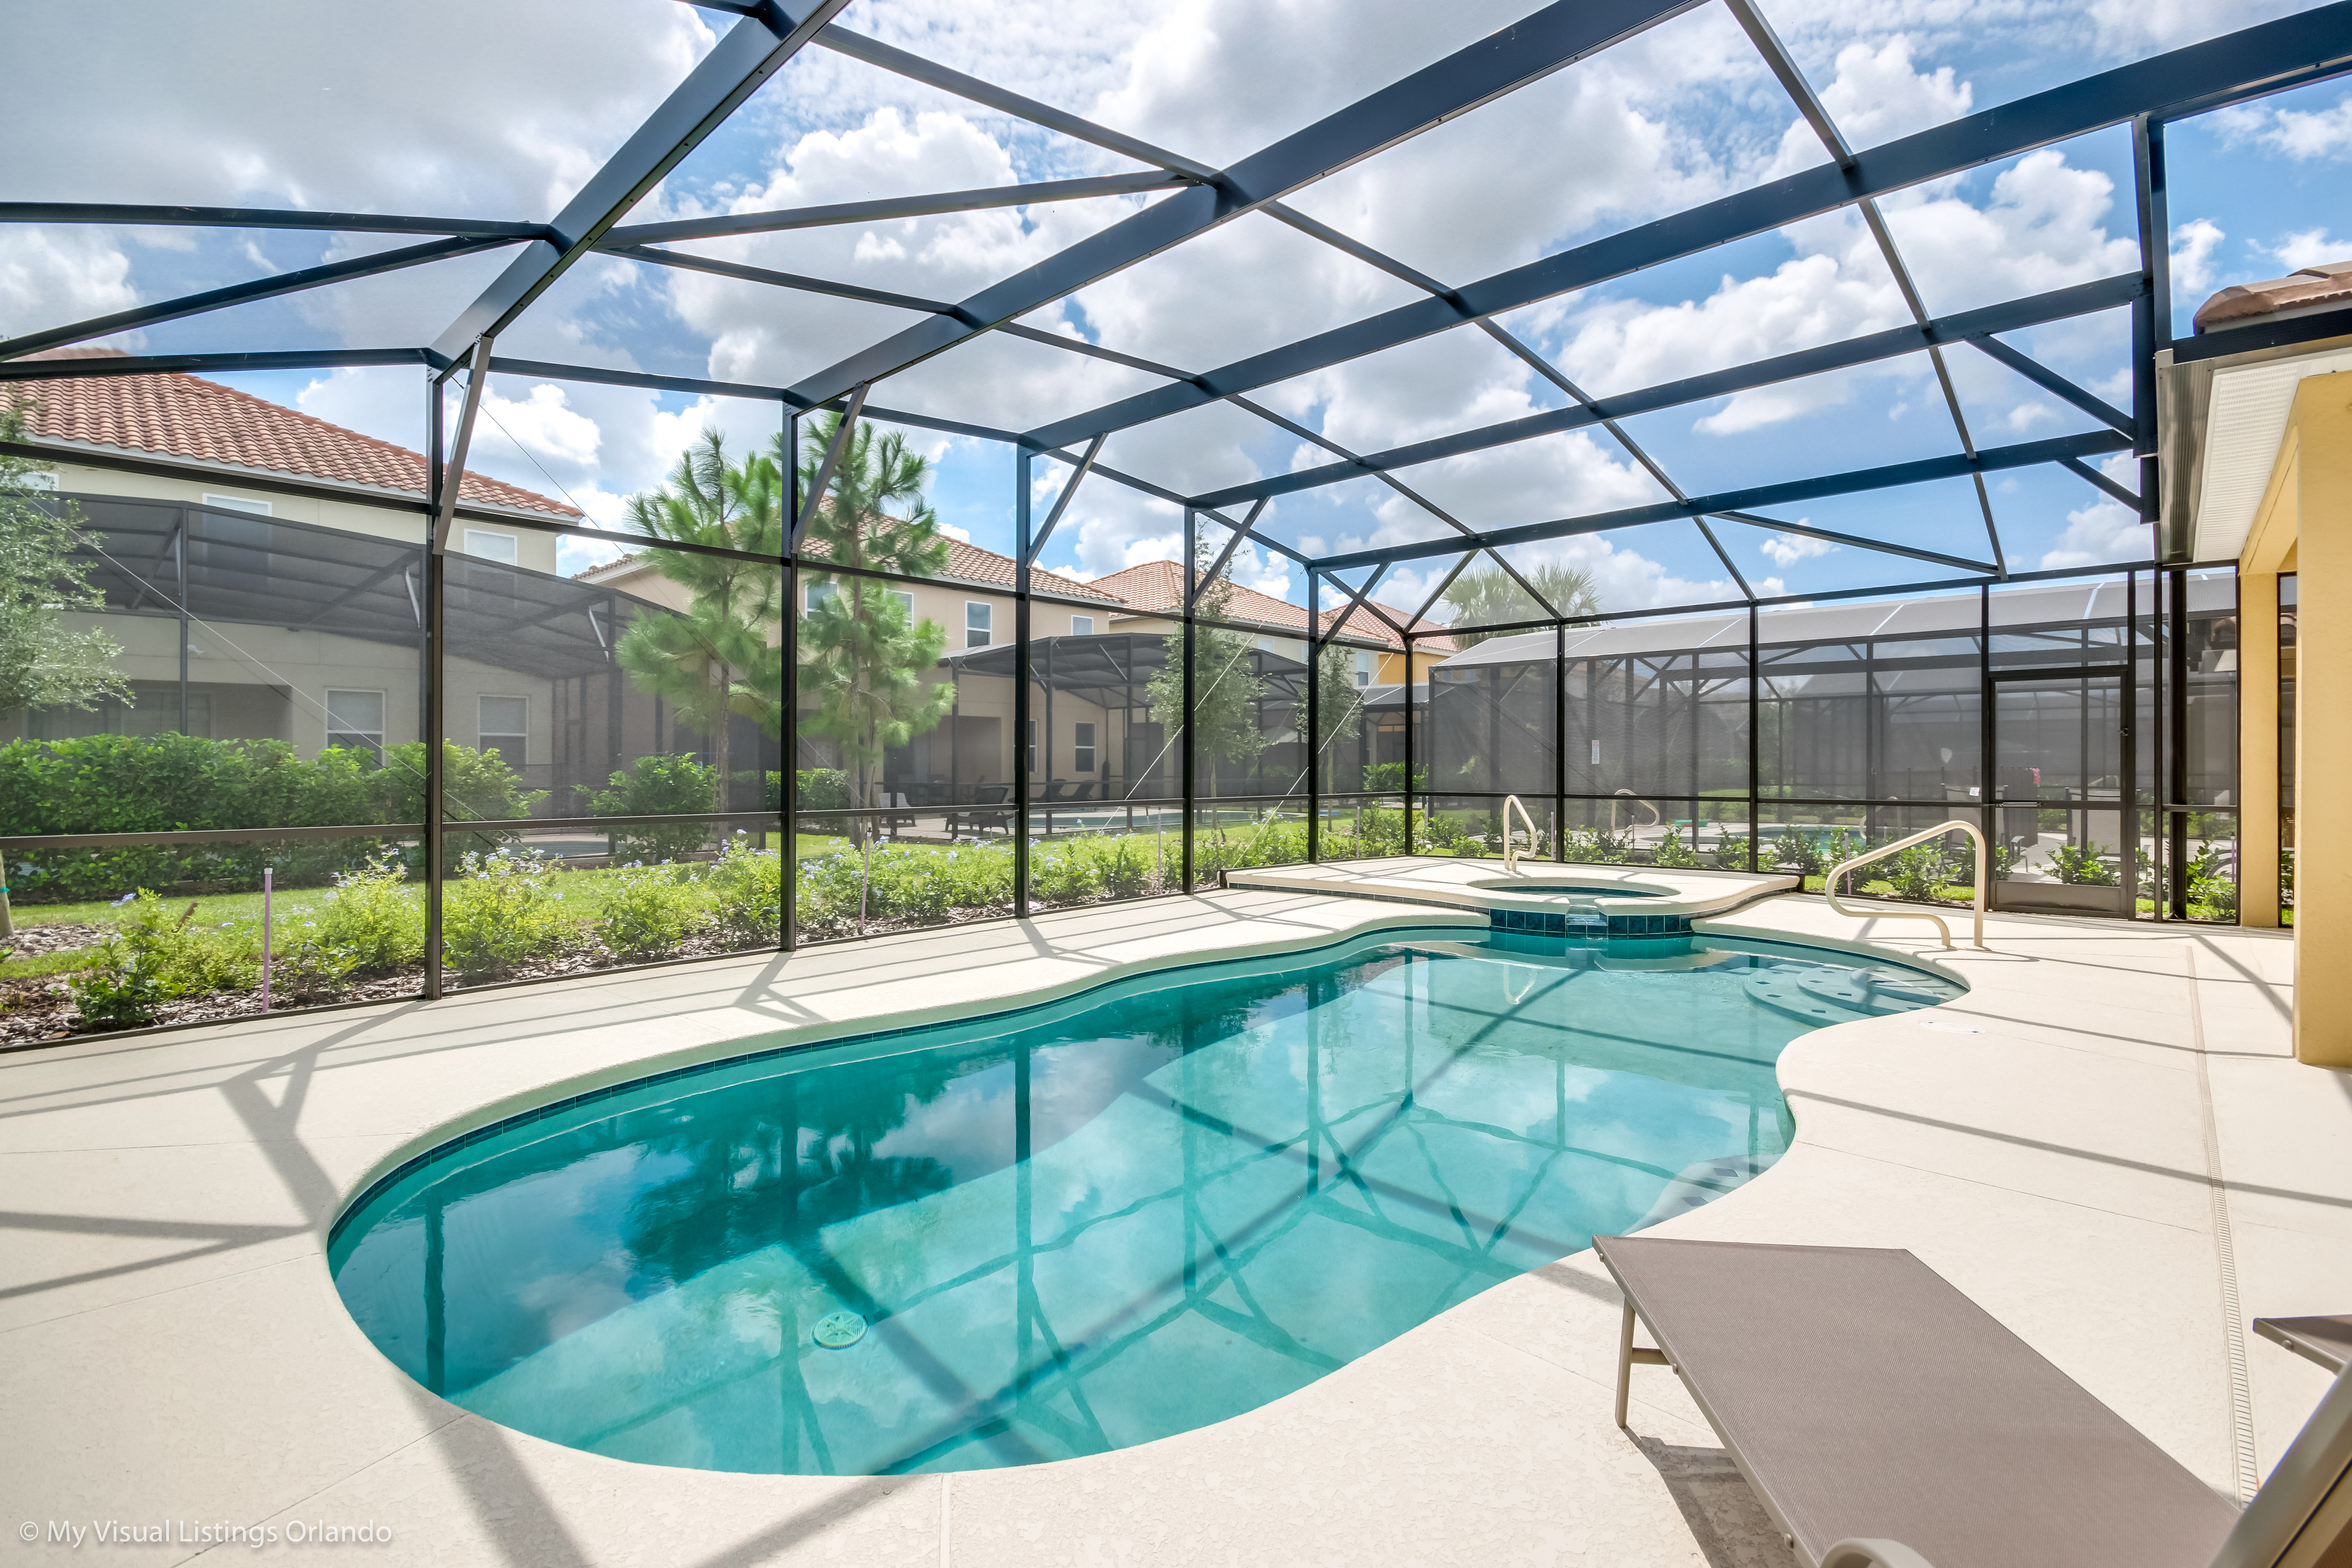 Amazing private pool of the home in Davenport Florida - Sparkling waters and lush surroundings create the perfect escape - Experience ultimate relaxation in poolside paradise